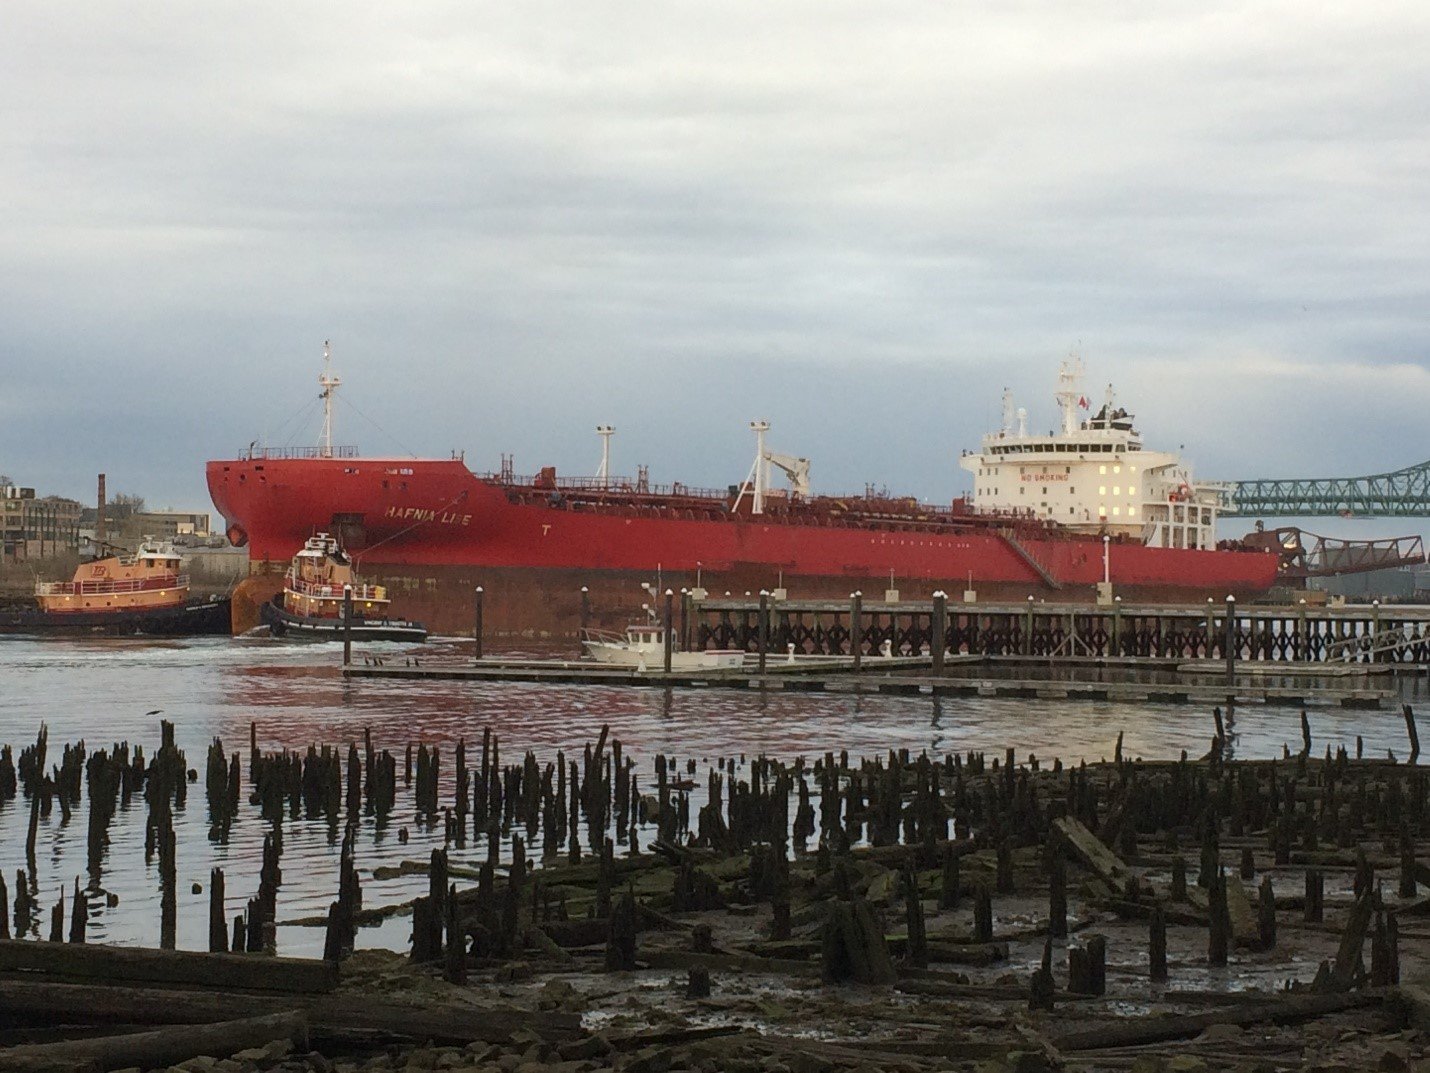 An oil tanker is pulled through Chelsea Creek (photo courtesy of author).